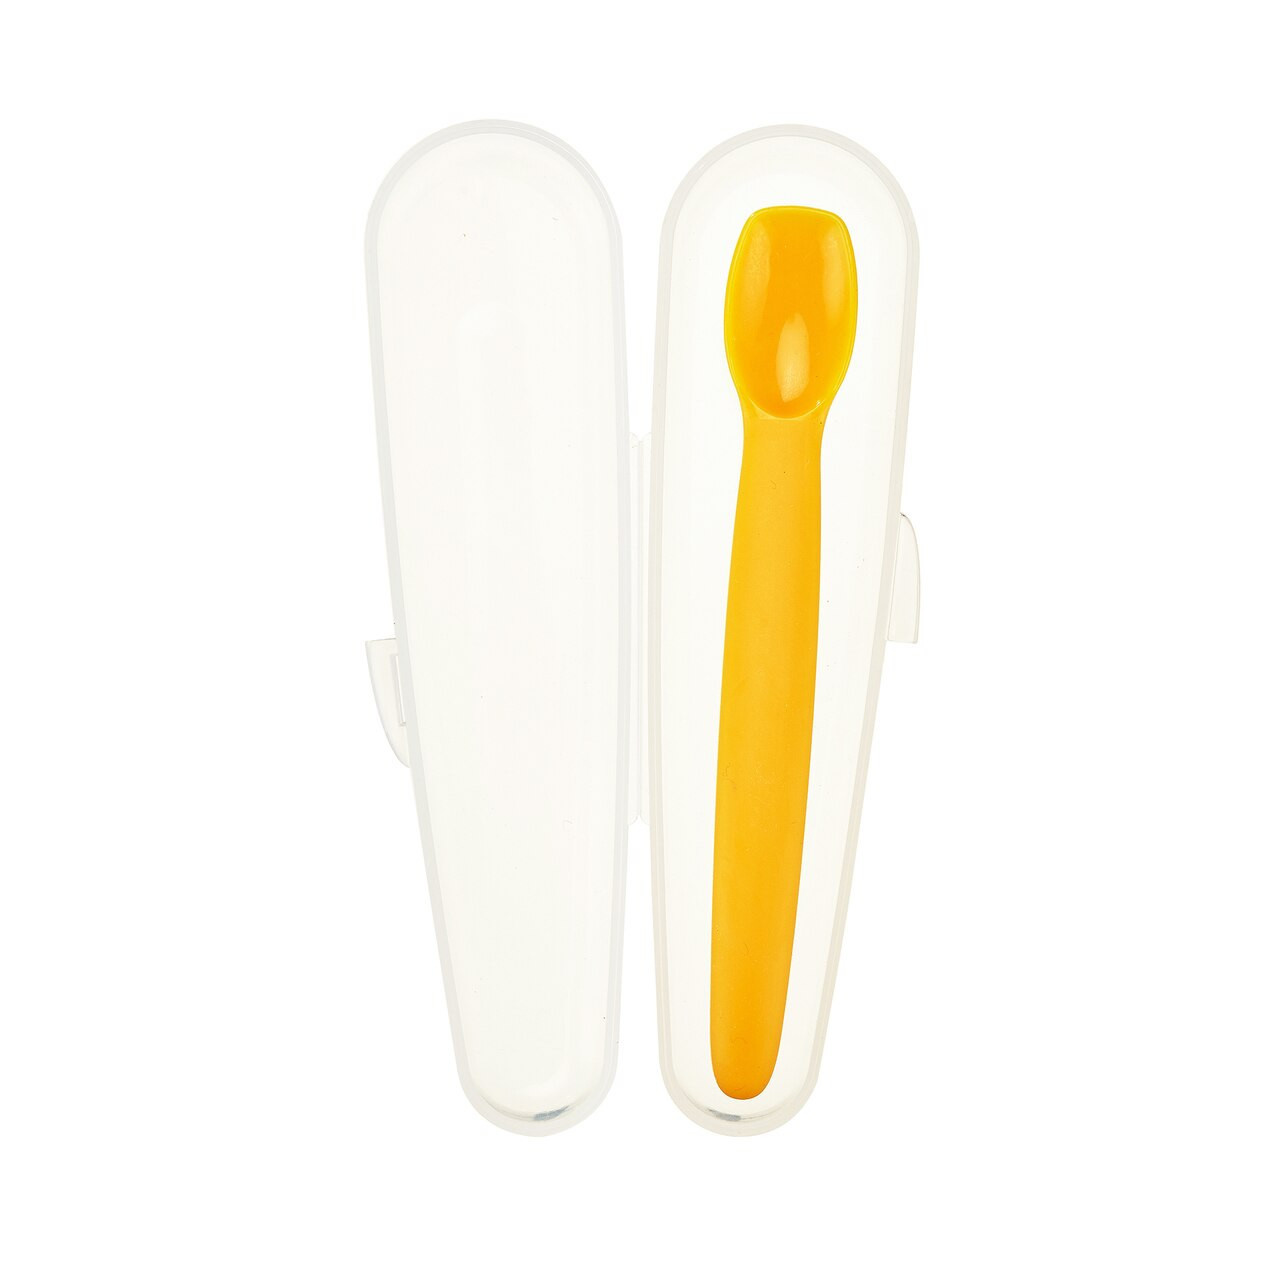 Silicone Baby Spoon w/ Carrying Case